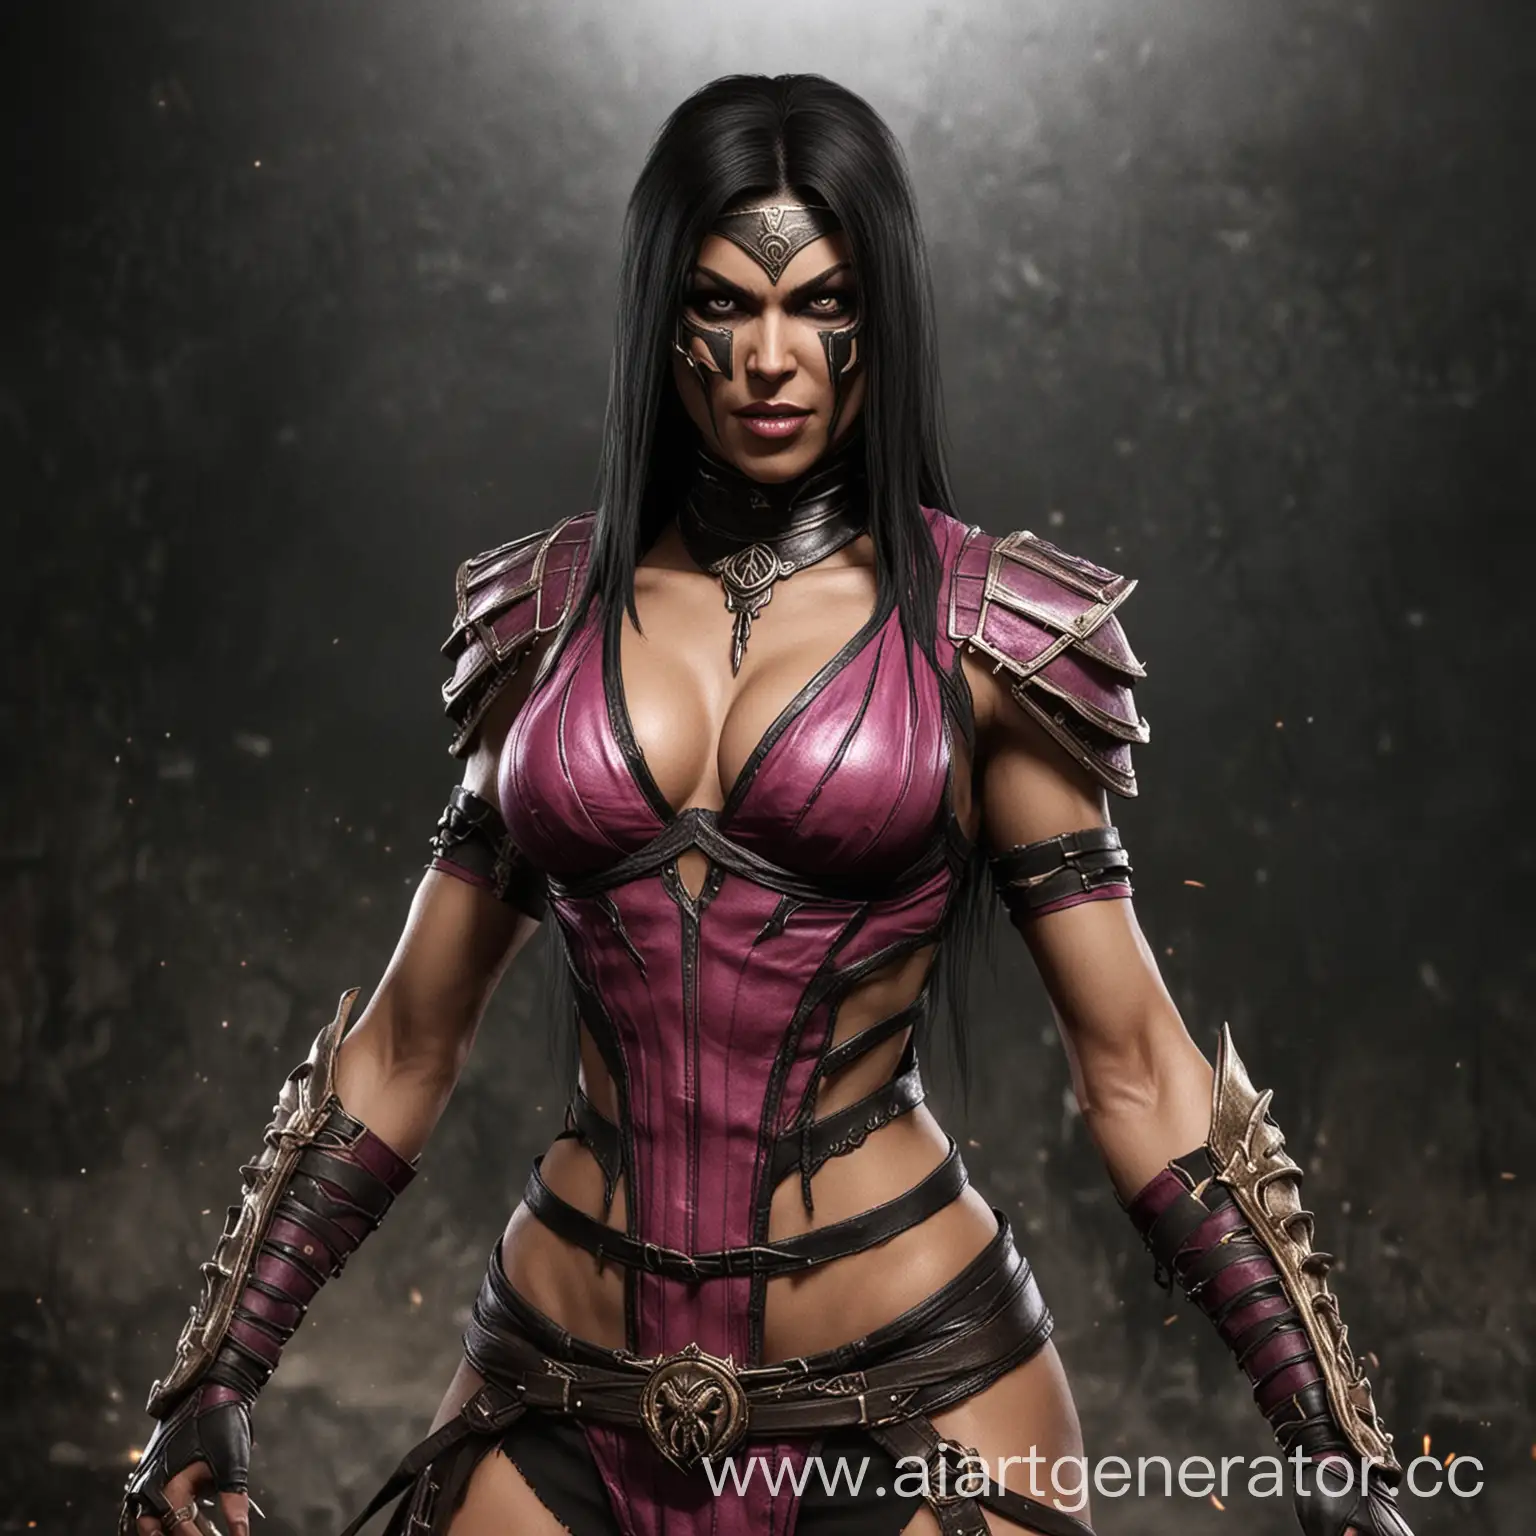 MKX-Mileena-Hot-Cosplay-Seductive-Portrayal-of-the-Fierce-Fighter